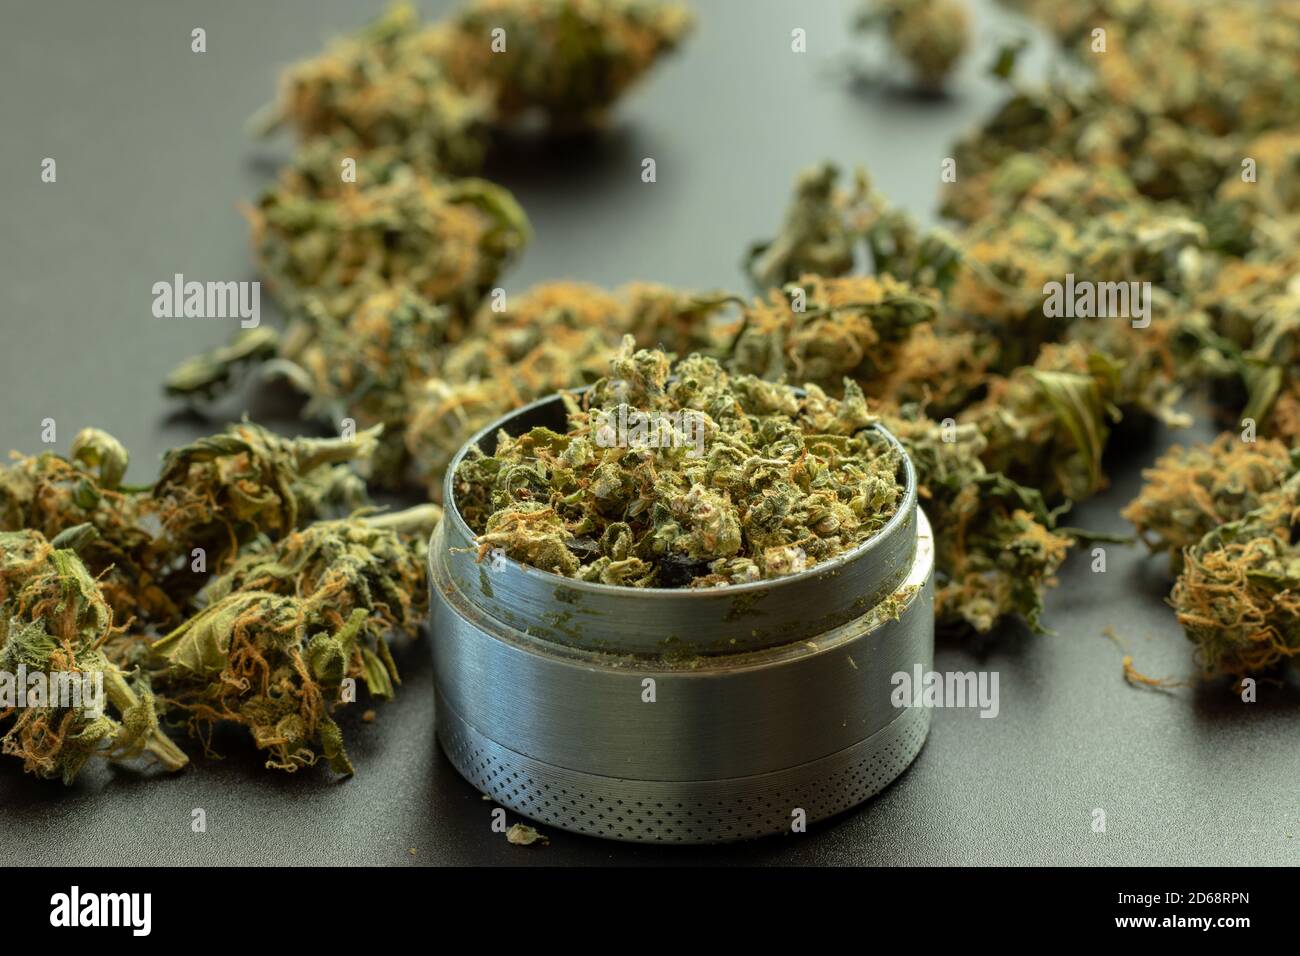 Grinder closeup with crumbled marijuana and cannabis buds in the background Stock Photo